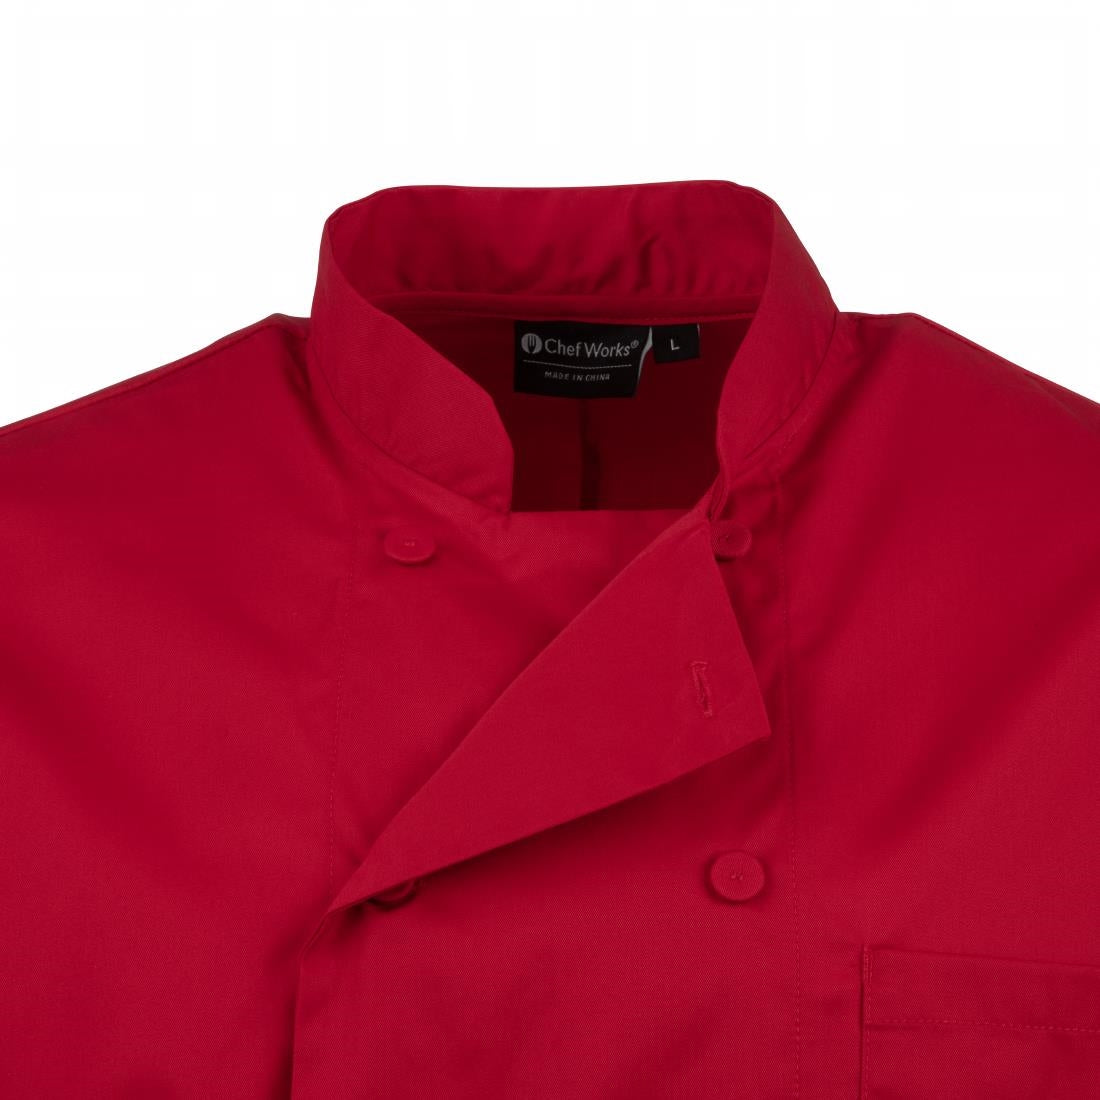 B106-S Chef Works Unisex Chefs Jacket Red S JD Catering Equipment Solutions Ltd